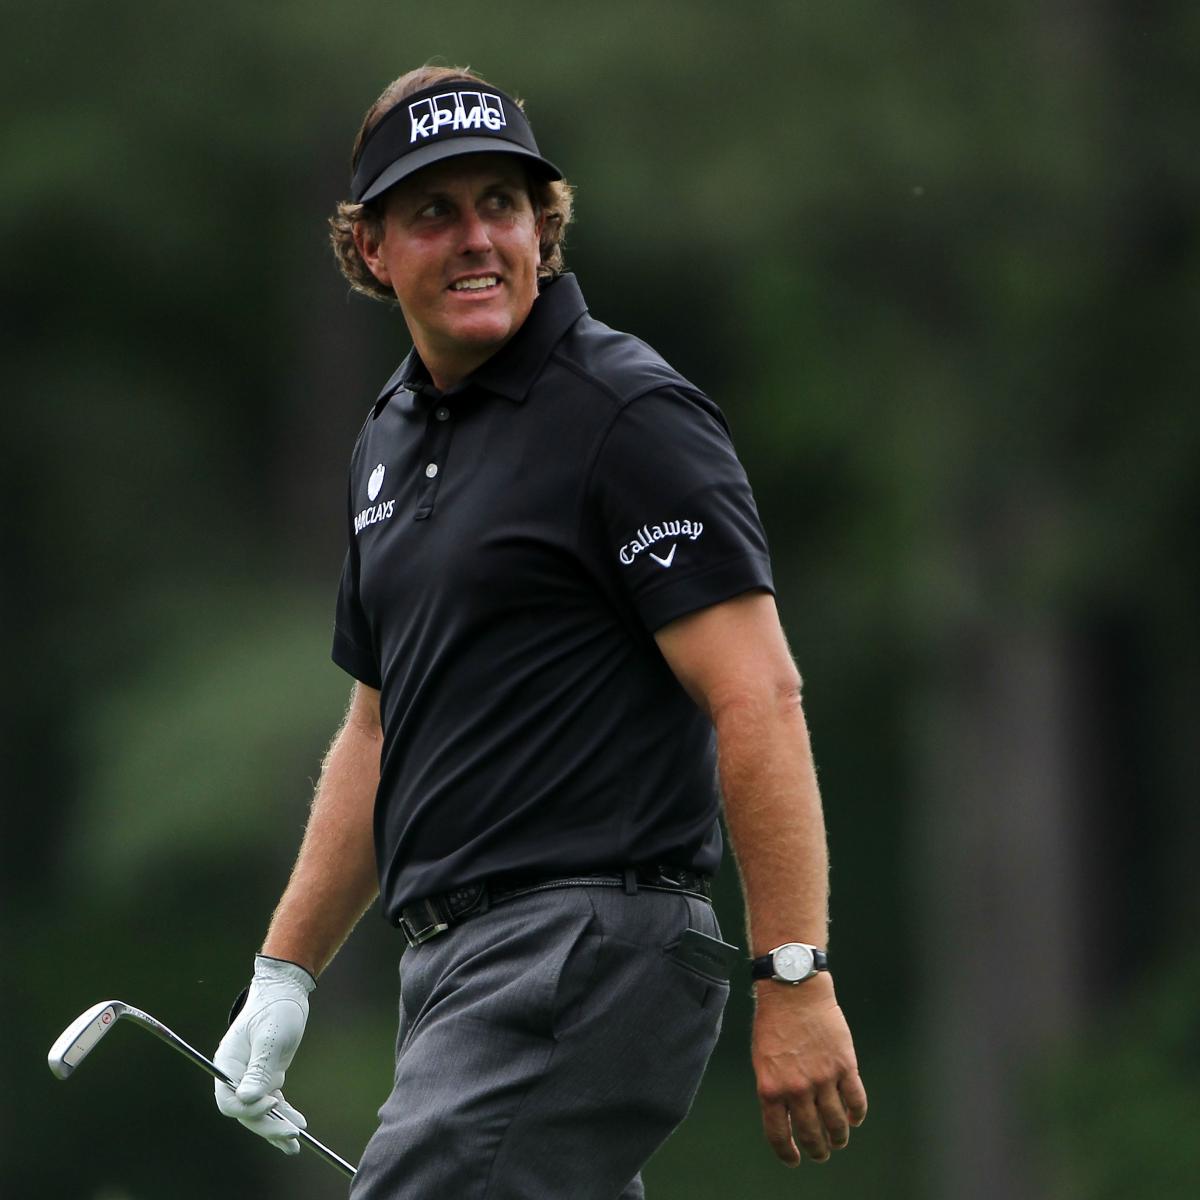 Phil Mickelson: 3-Time Champ Will Outclass Field to Take Home Fourth ...